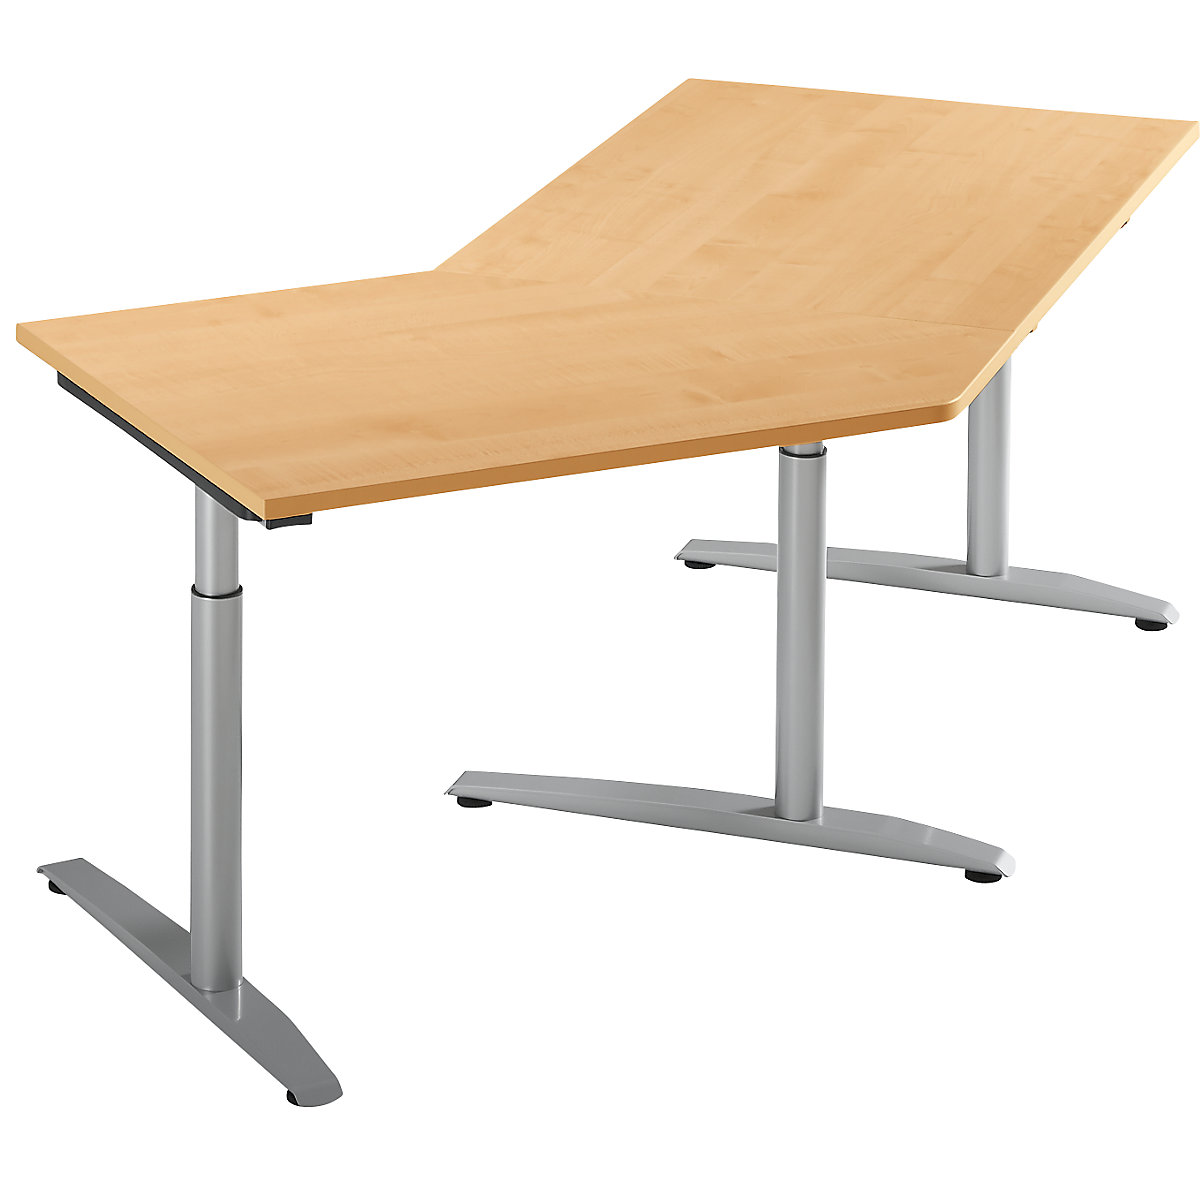 Add-on table, height adjustable from 680 - 820 mm HANNA